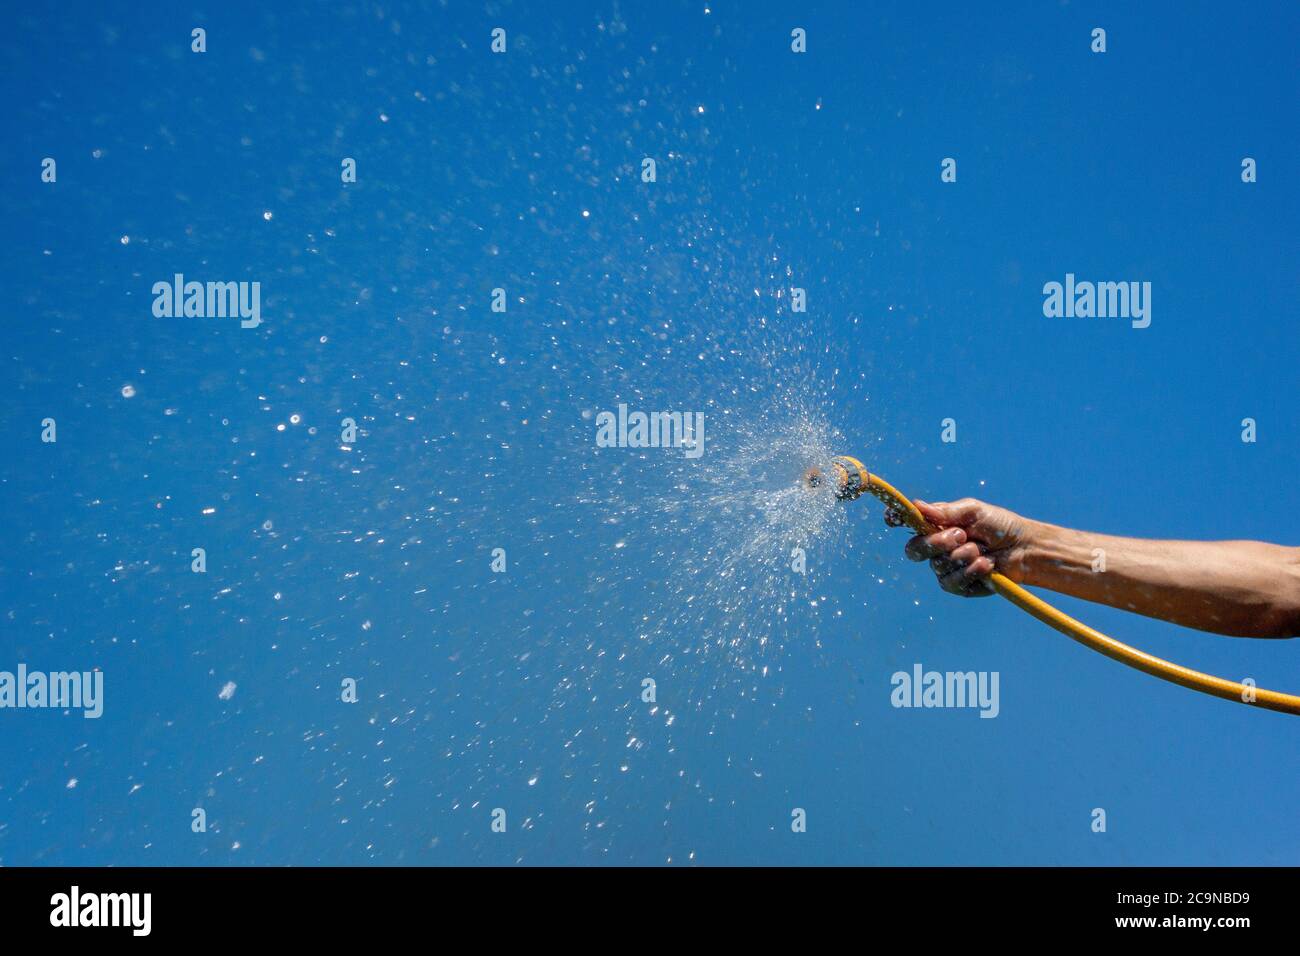 Water from a hose pipe being sprayed under pressure, against a blue summers sky. North Yorkshire, UK. Stock Photo